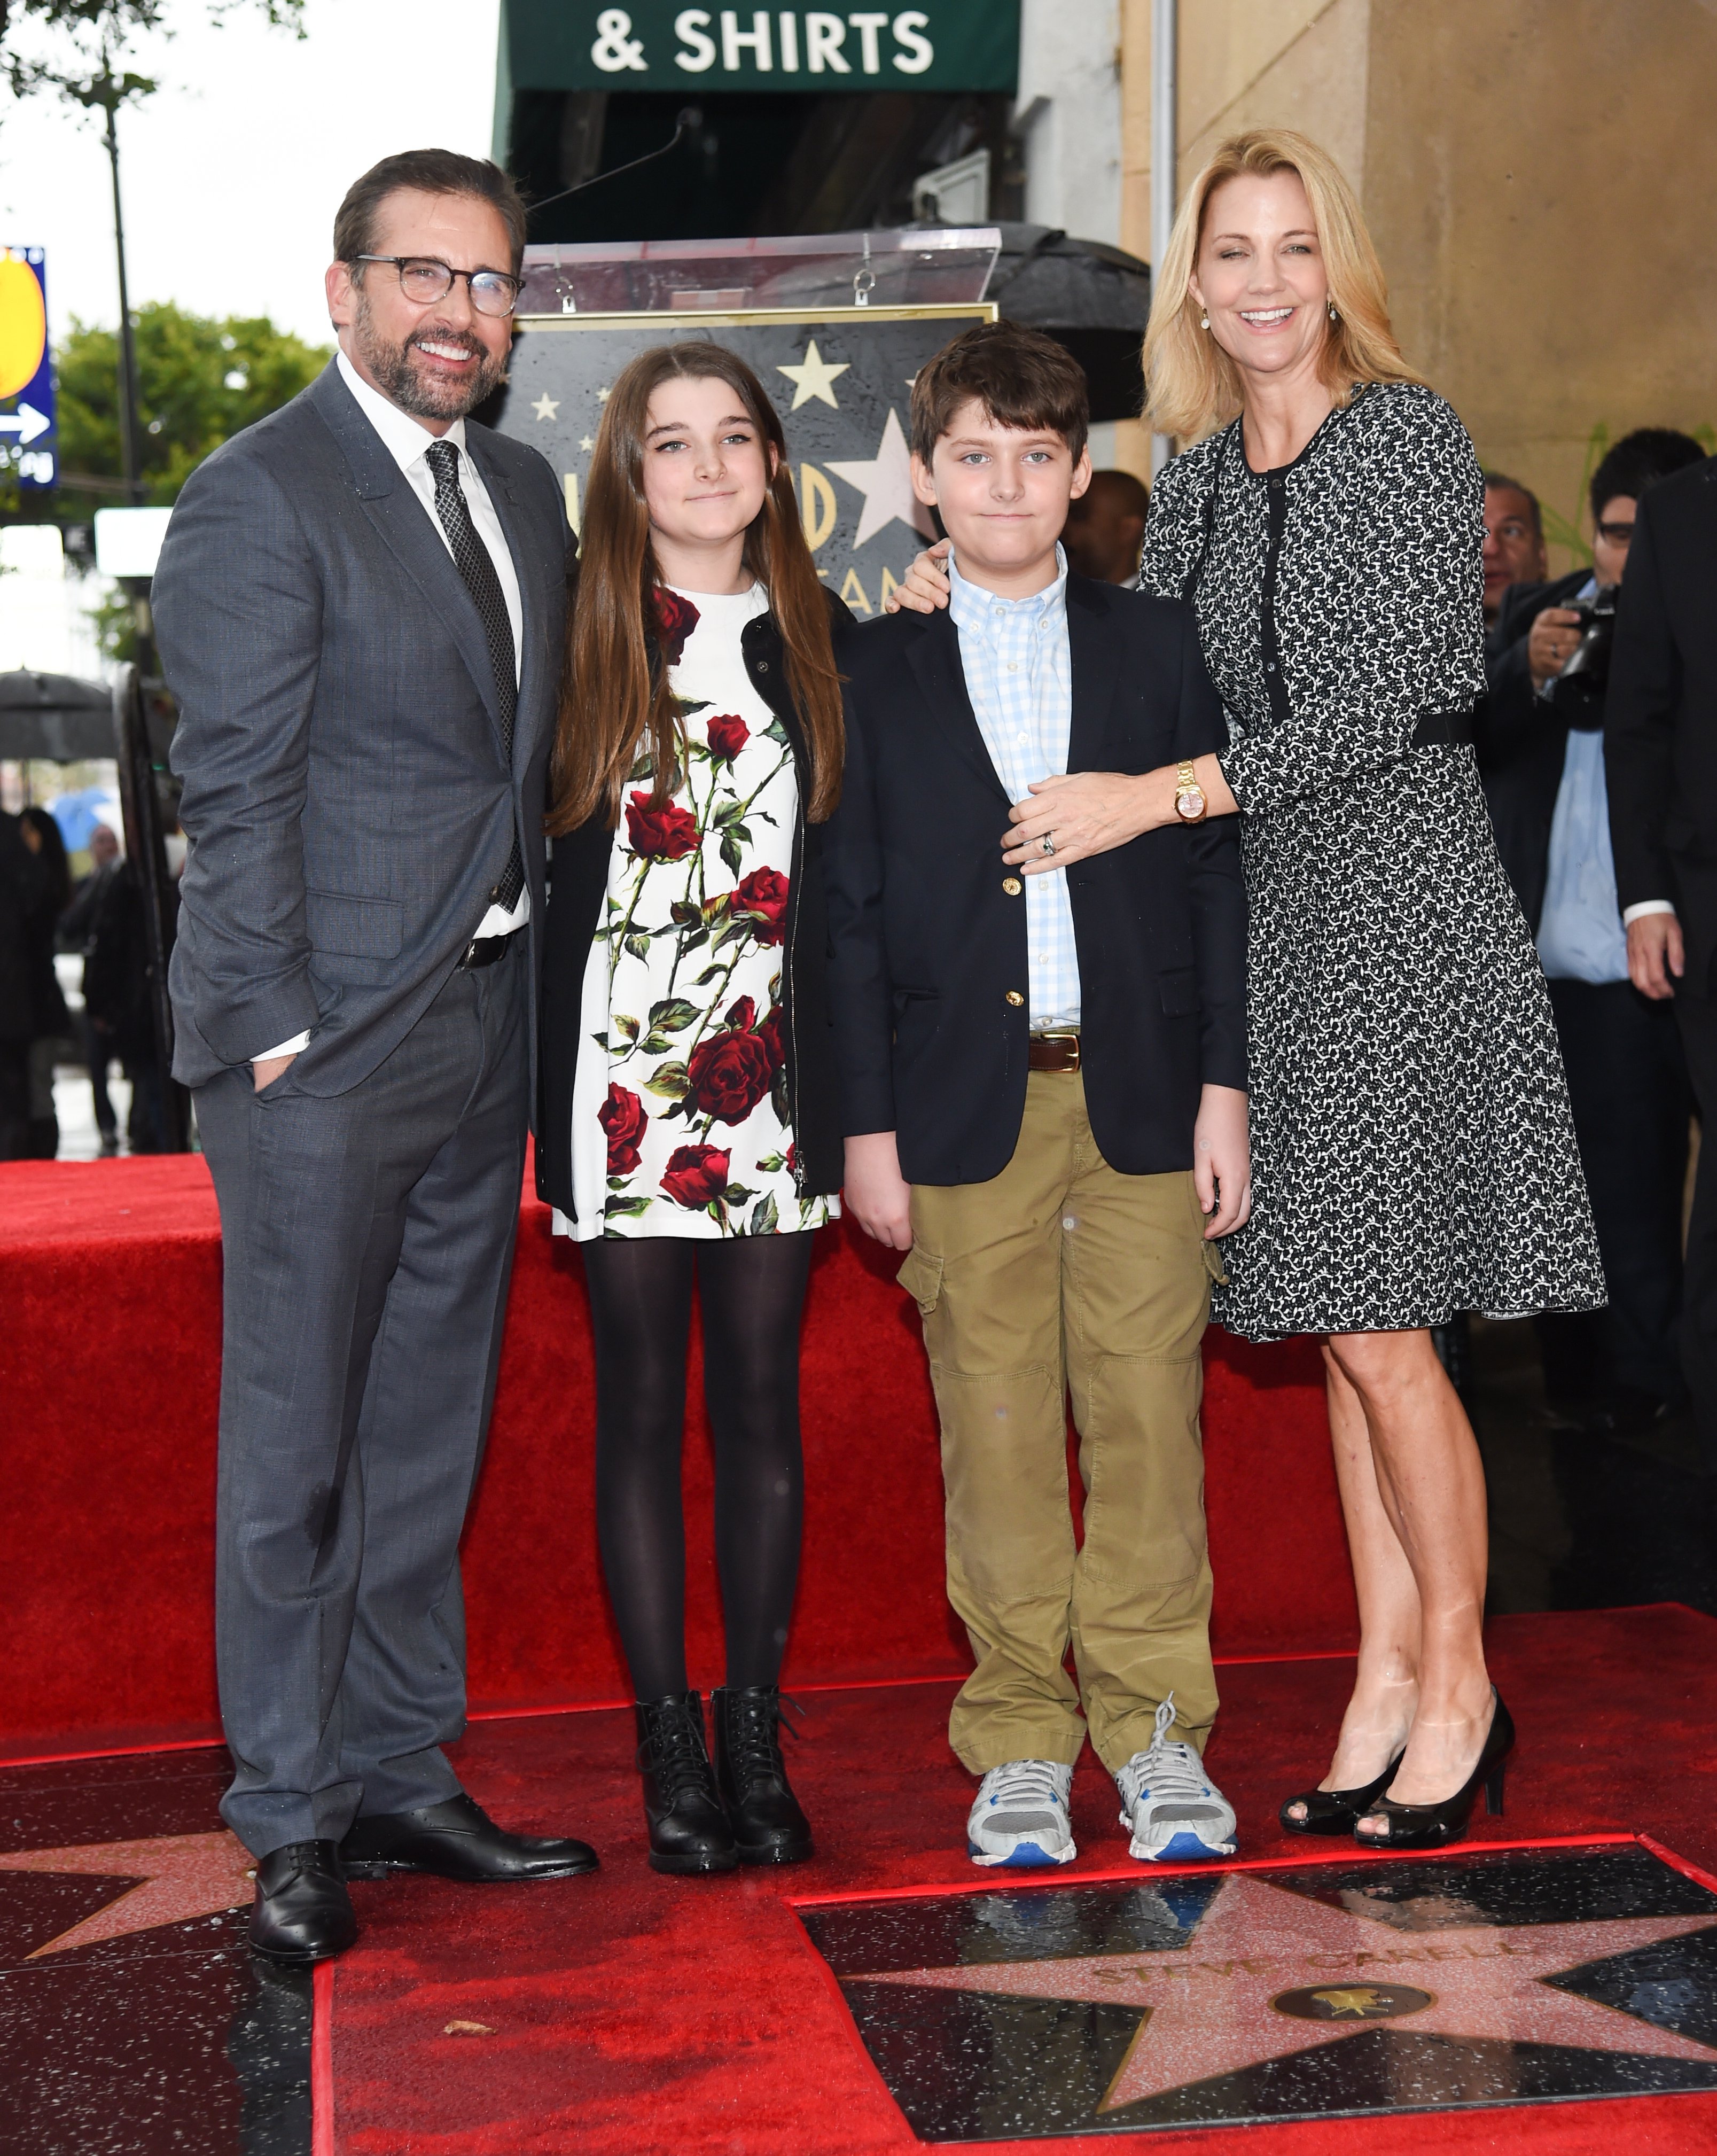 Steve, Nancy, Elisabeth Anne, and John Carell at the Hollywood Walk of Fame in Los Angeles on January 6, 2016 | Source: Getty Images